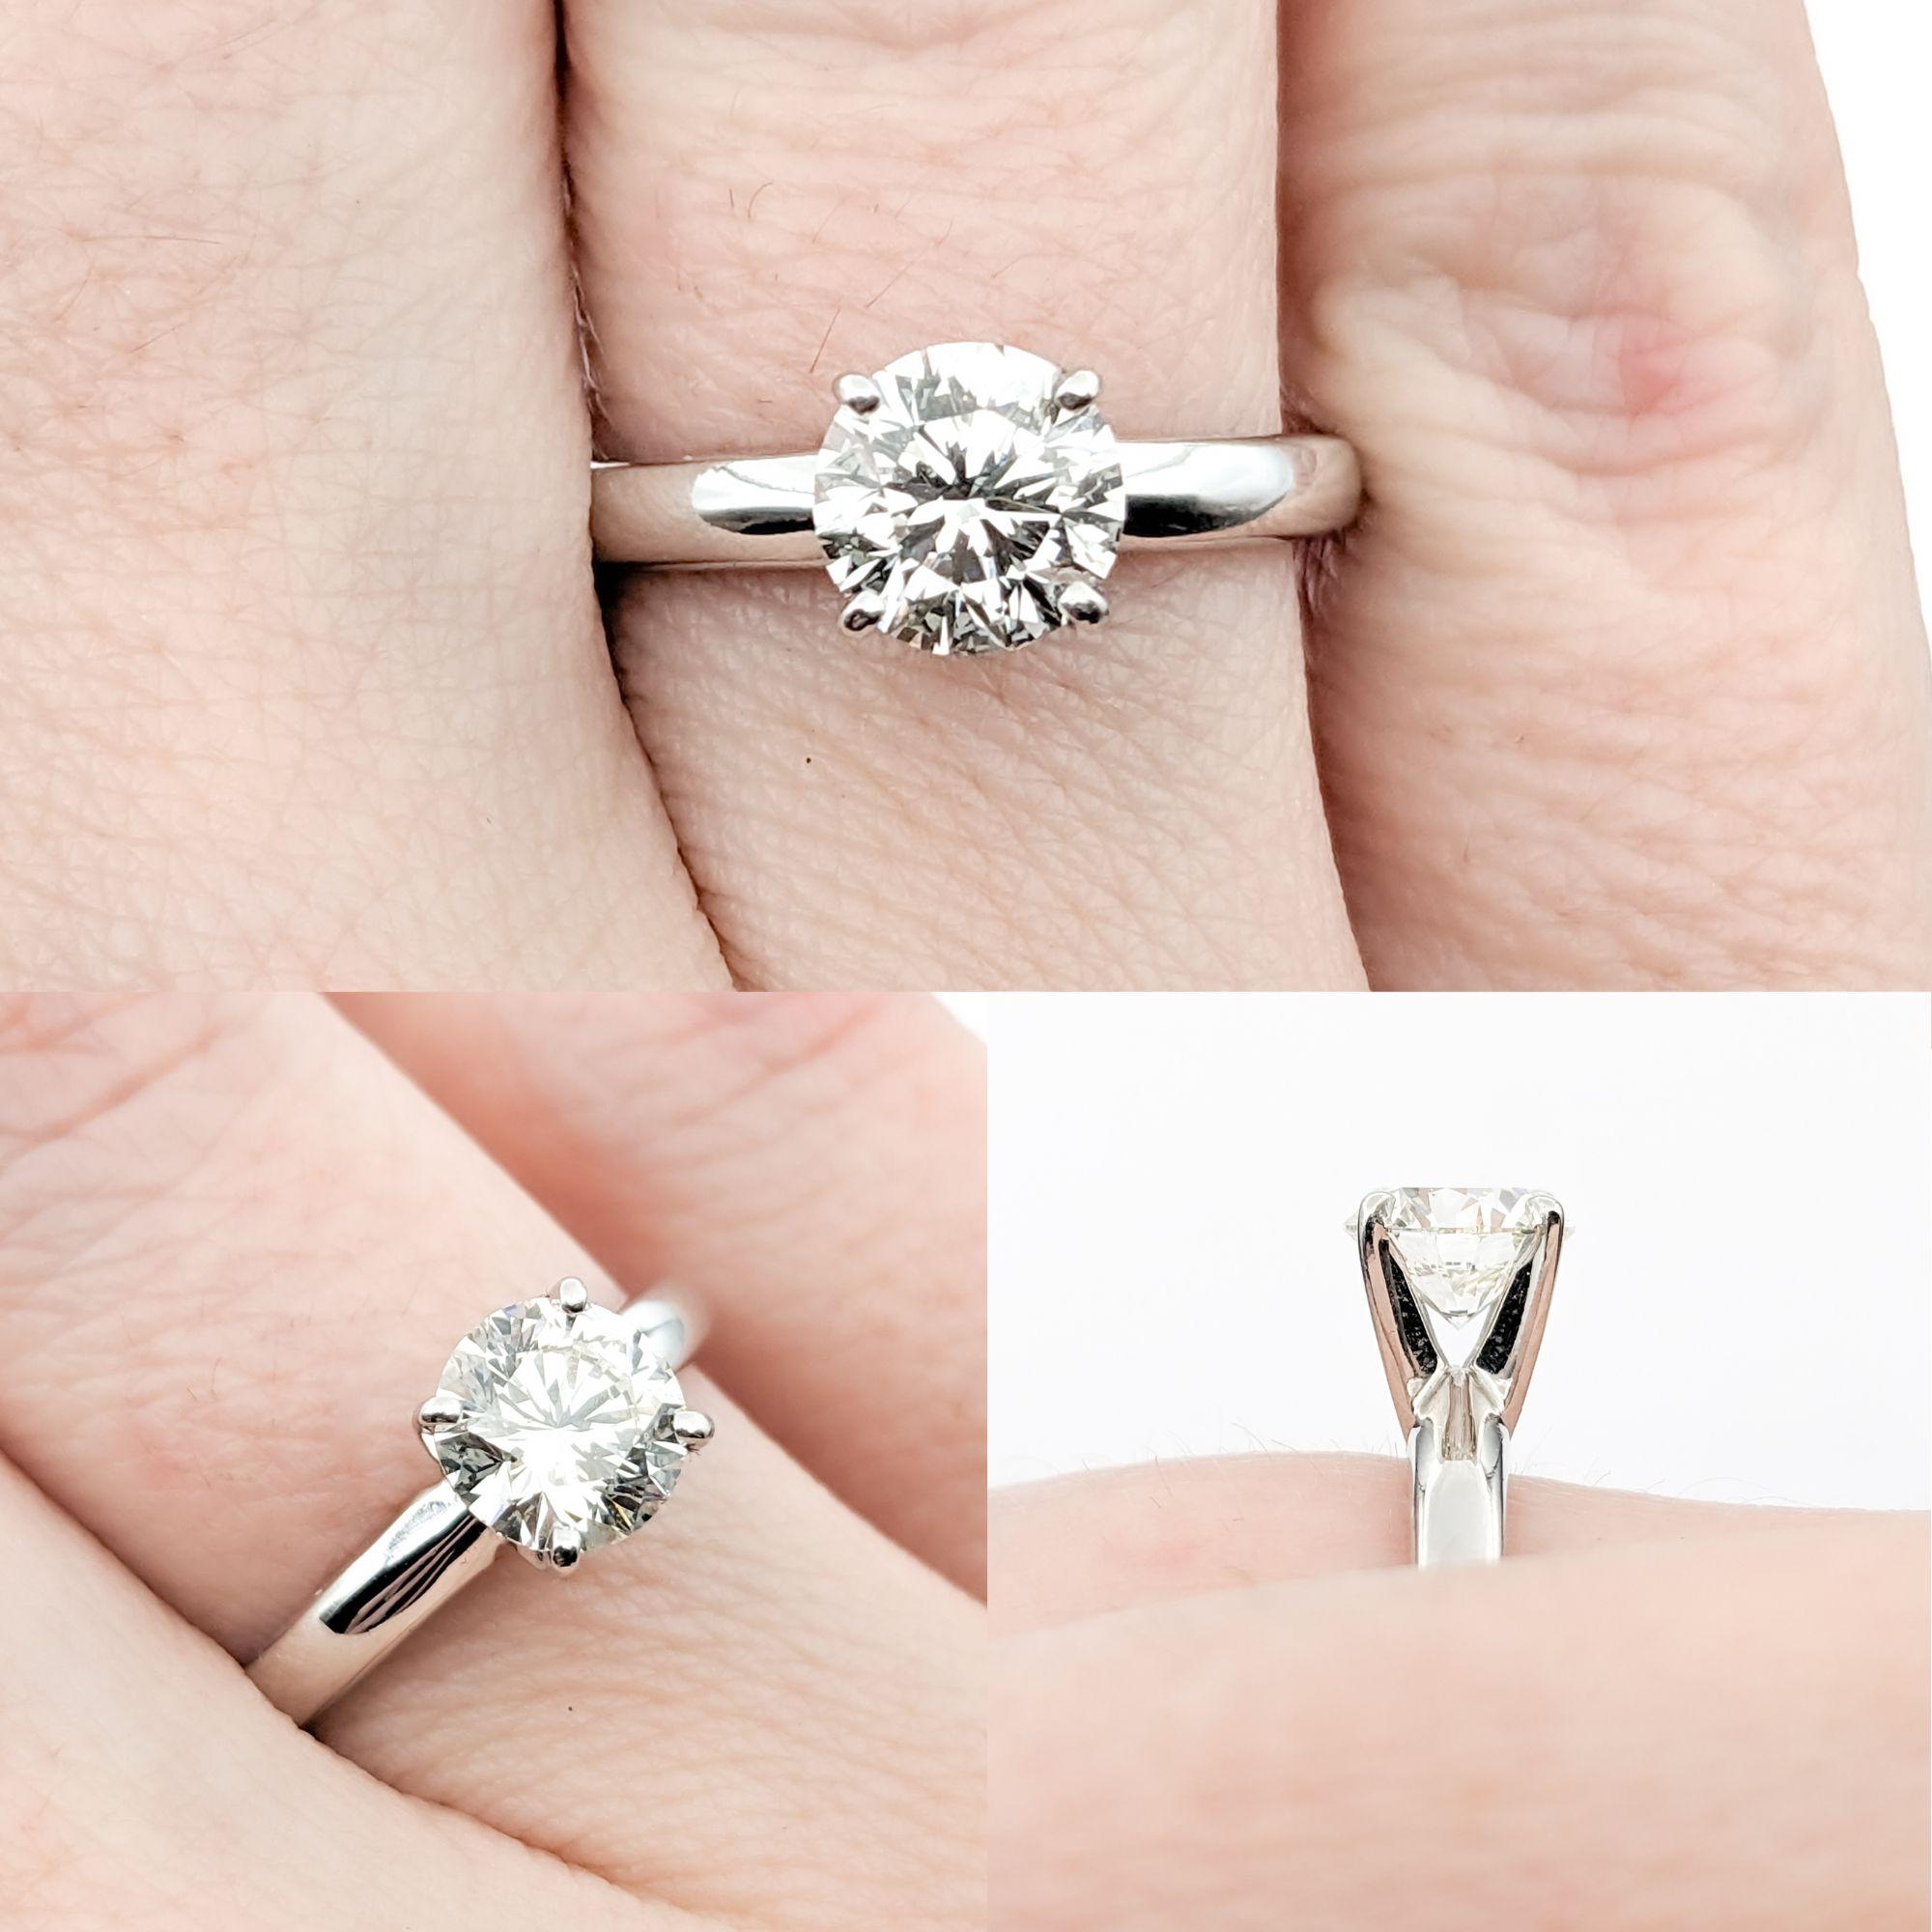 .97ct Diamond Engagement Solitaire Ring In White Gold

This exquisite Diamond Engagement Ring Solitaire is masterfully crafted in 14kt white gold, showcasing a stunning .97ct diamond solitaire. The featured diamond is certified by GSI with the